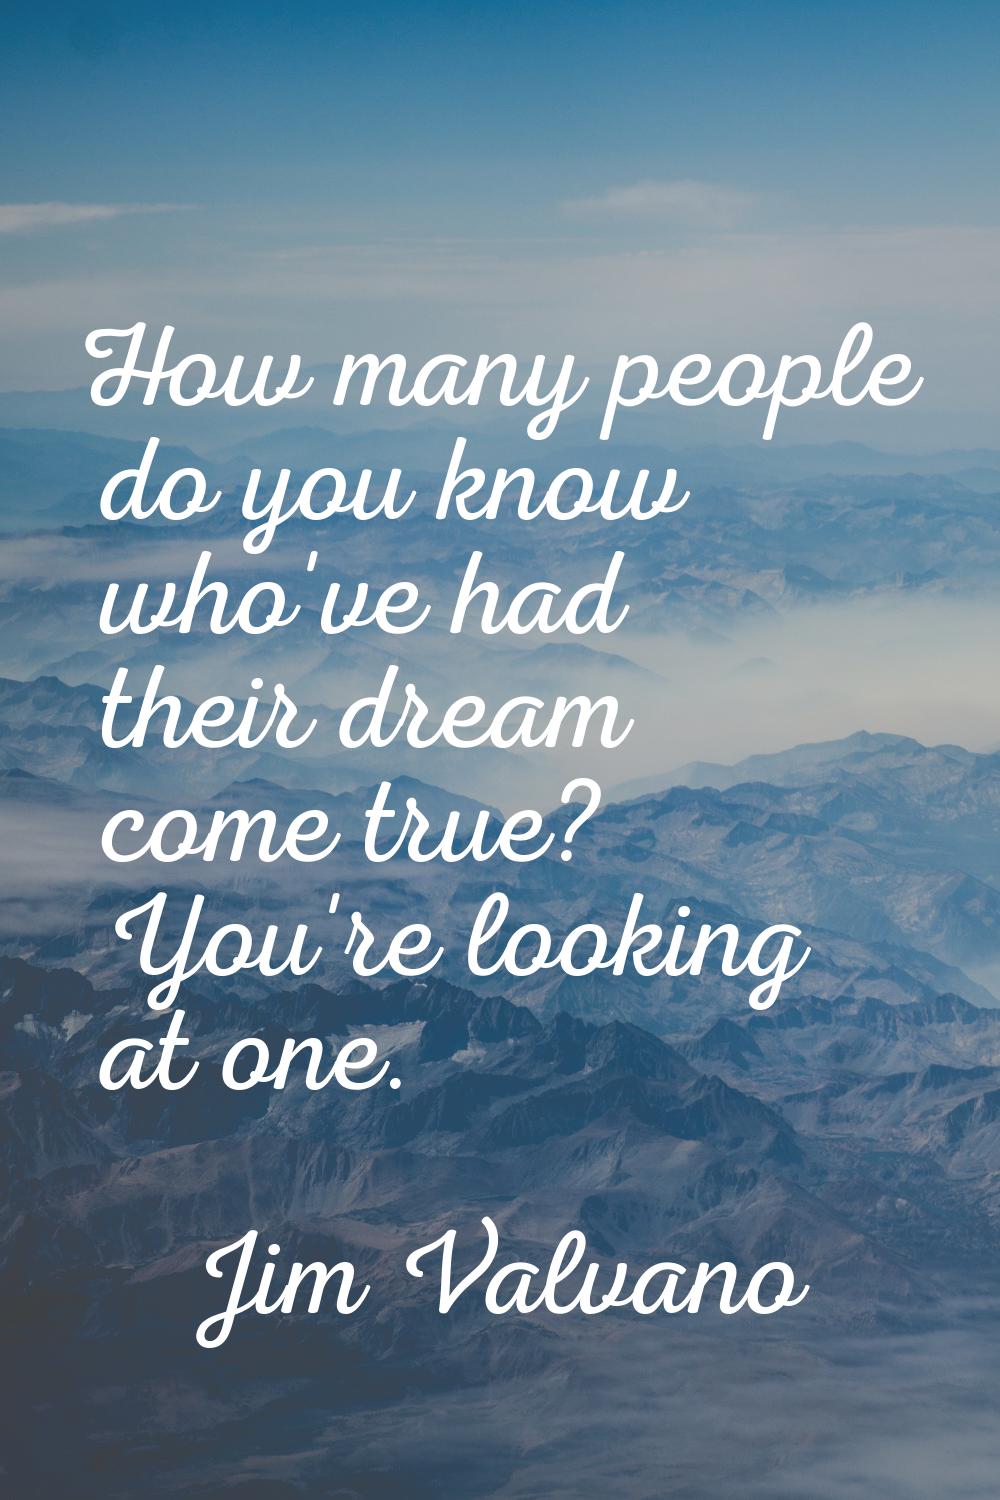 How many people do you know who've had their dream come true? You're looking at one.